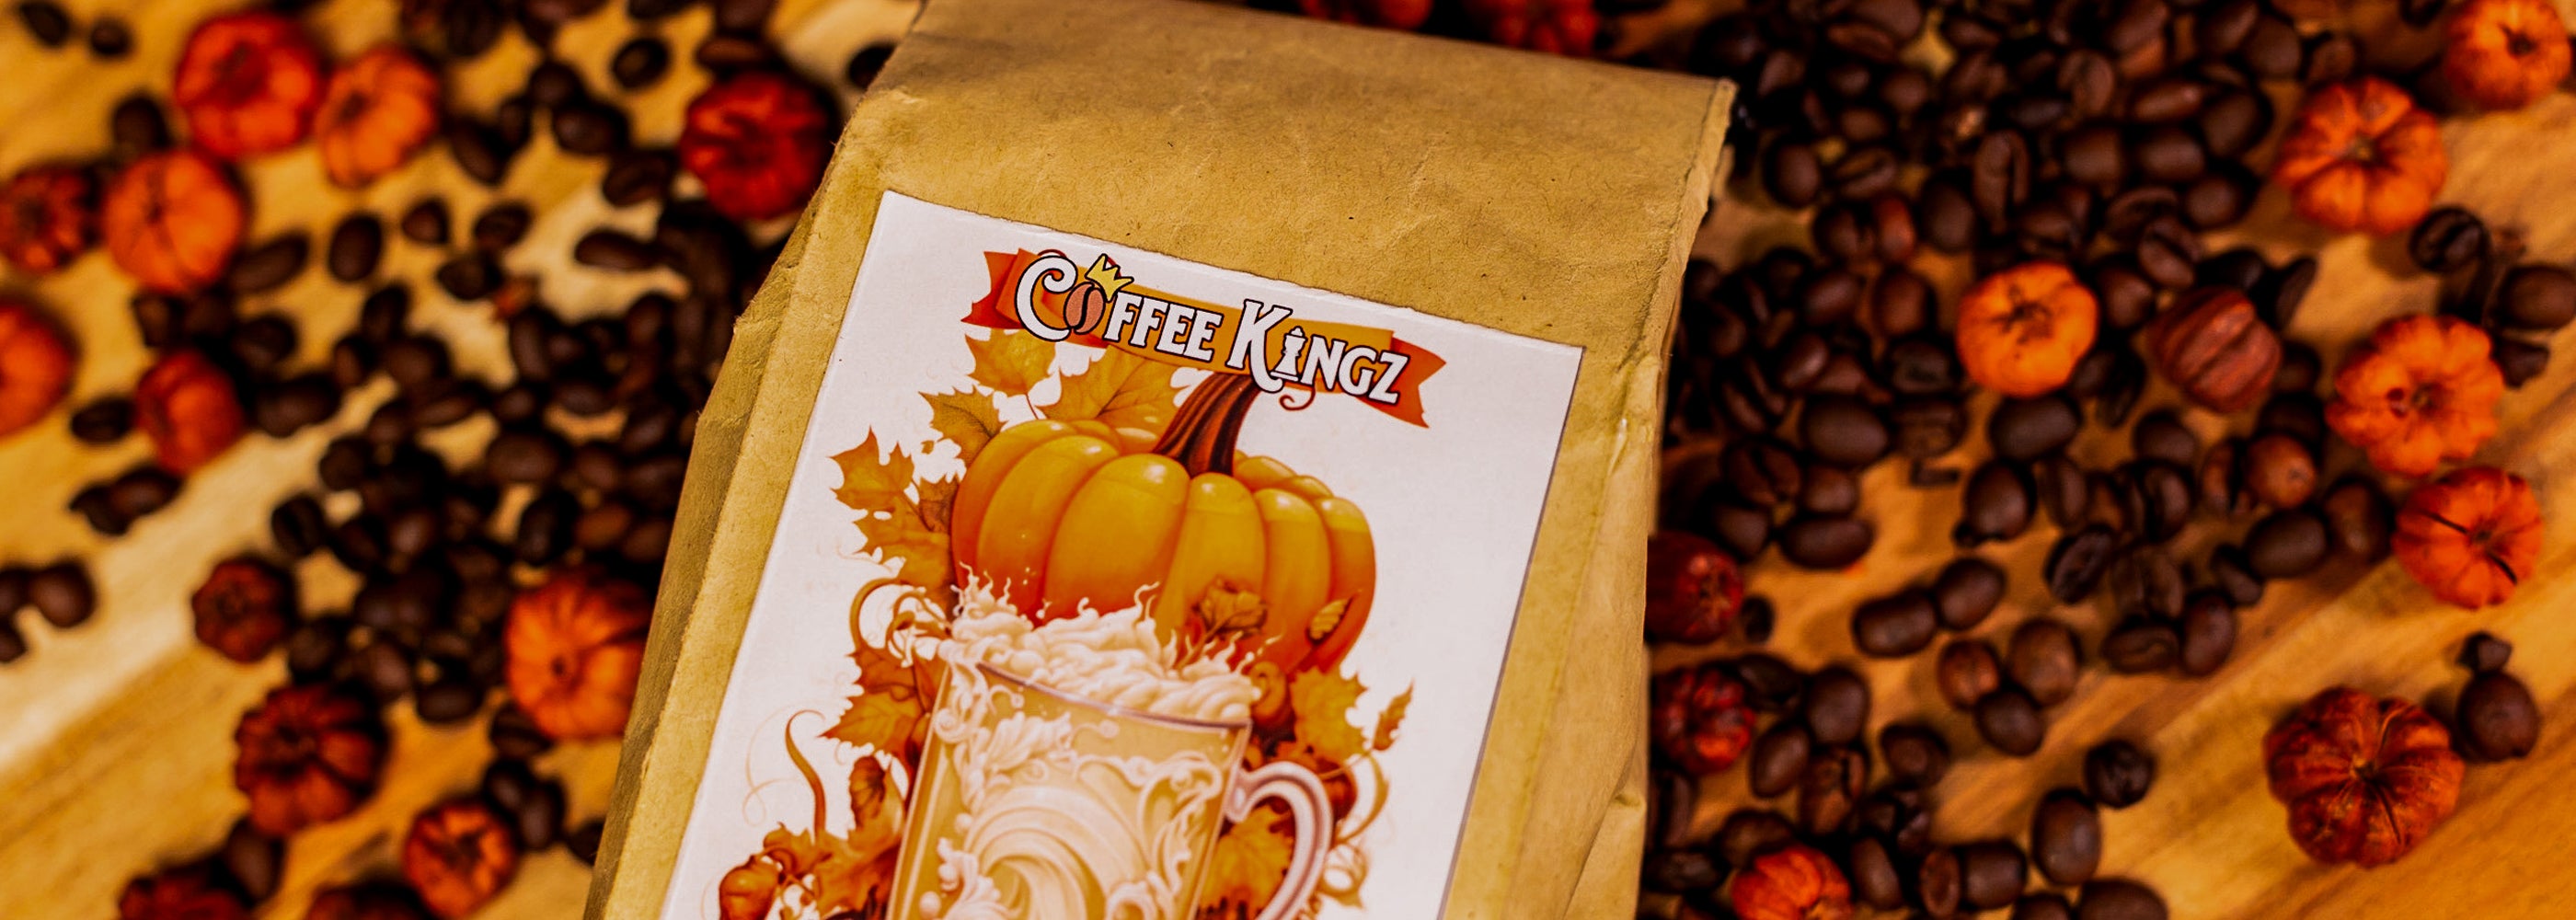 A package of Coffee Kingz pumpkin spice flavored coffee surrounded by a bed of coffee beans and autumnal accents, evoking cozy fall vibes.